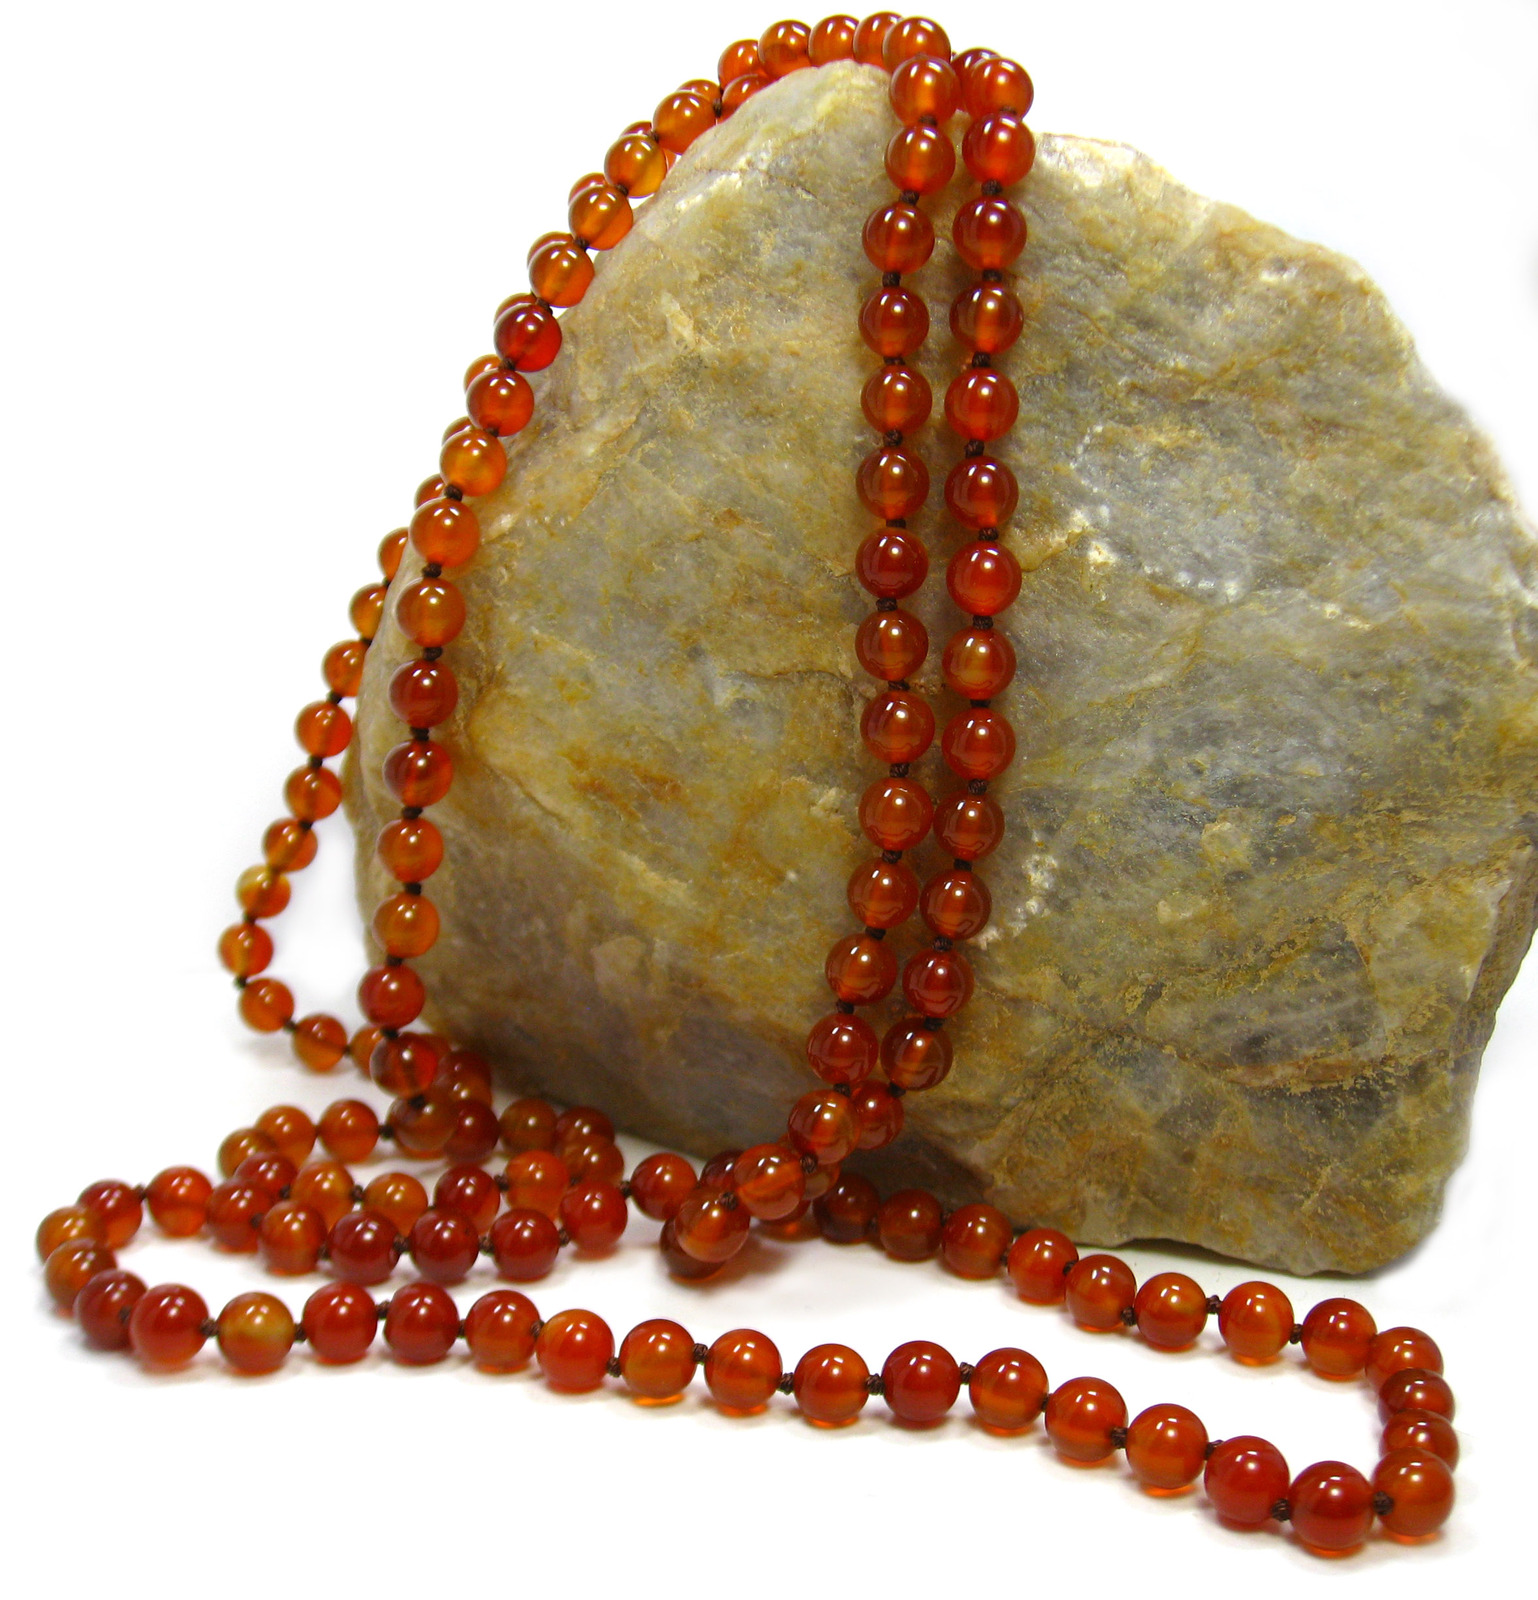 Primary image for Sosi B. Gemstone Hand-Knotted Endless Necklace, Carnelian